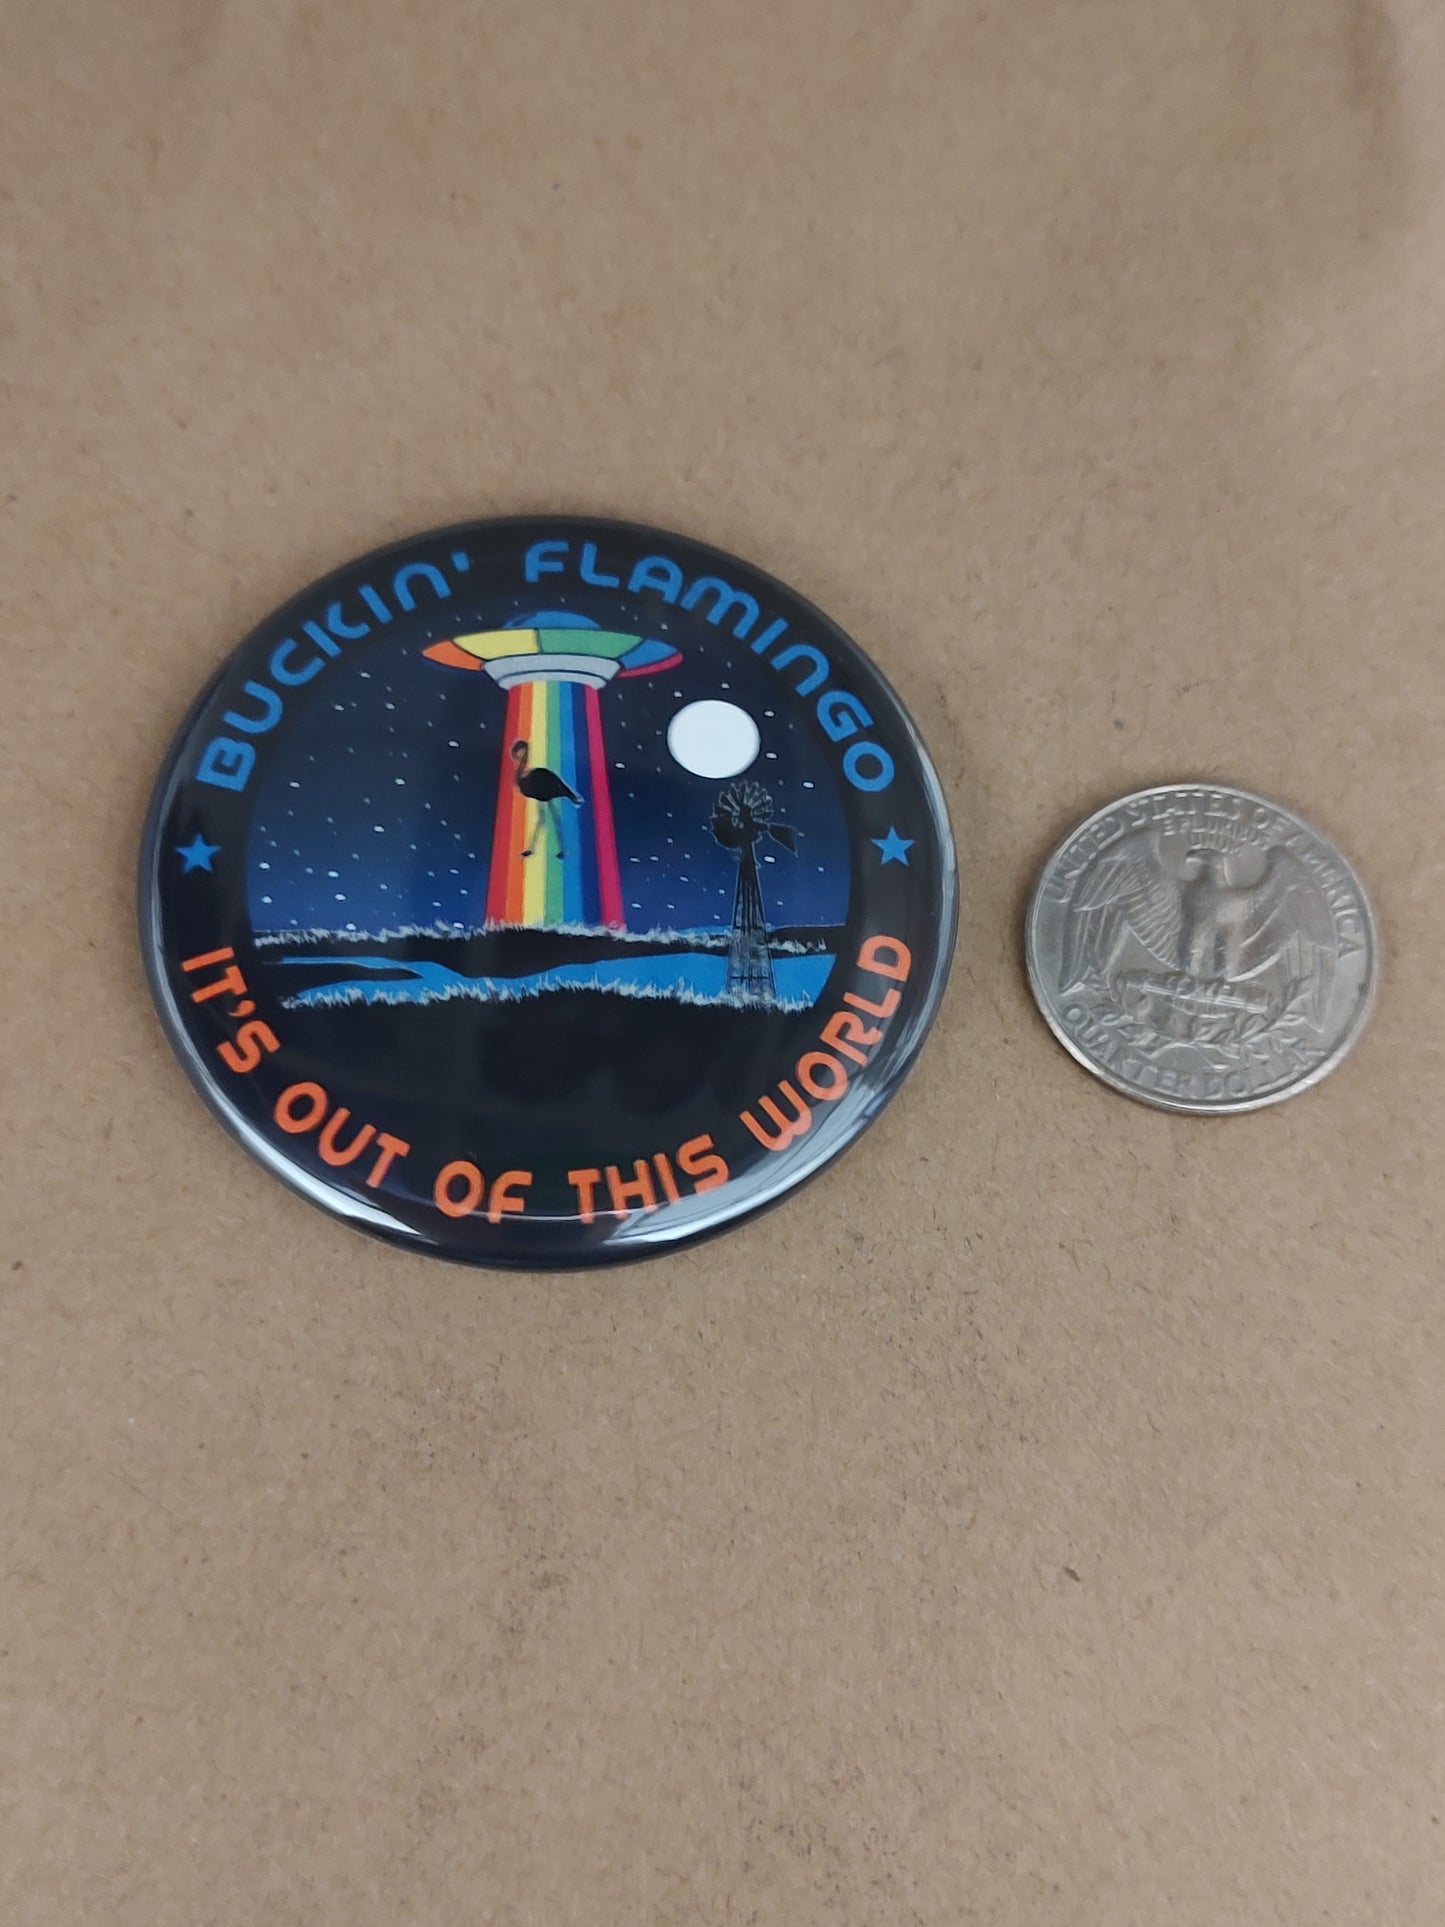 Buckin' Flamingo - It's Out Of This World Magnet